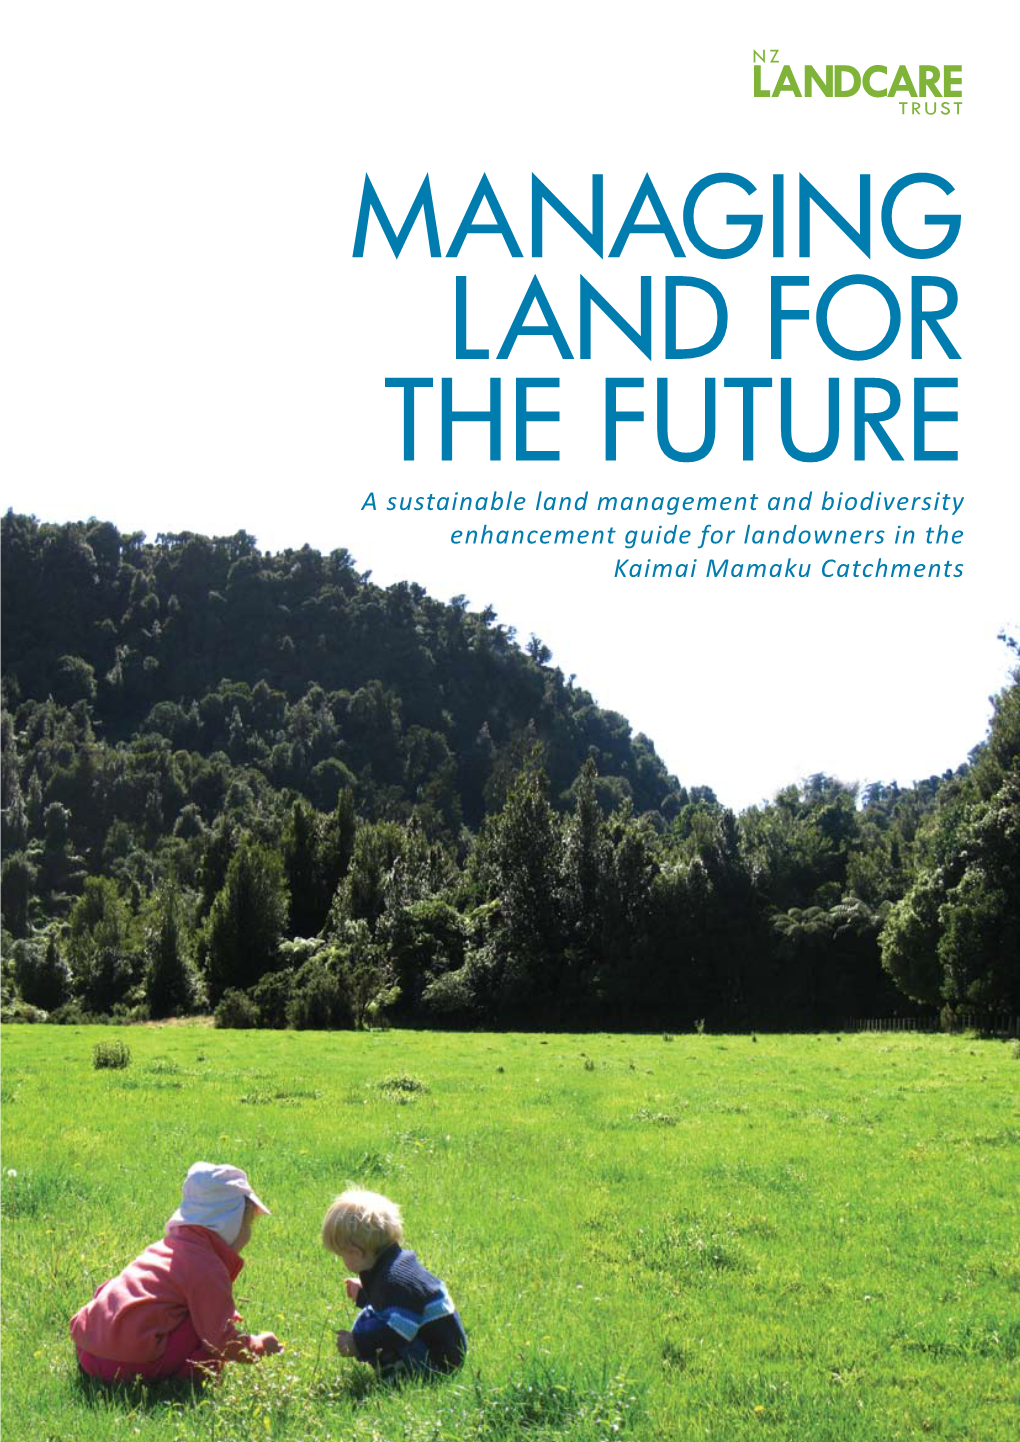 MANAGING LAND for the FUTURE a Sustainable Land Management and Biodiversity Enhancement Guide for Landowners in the Kaimai Mamaku Catchments 2